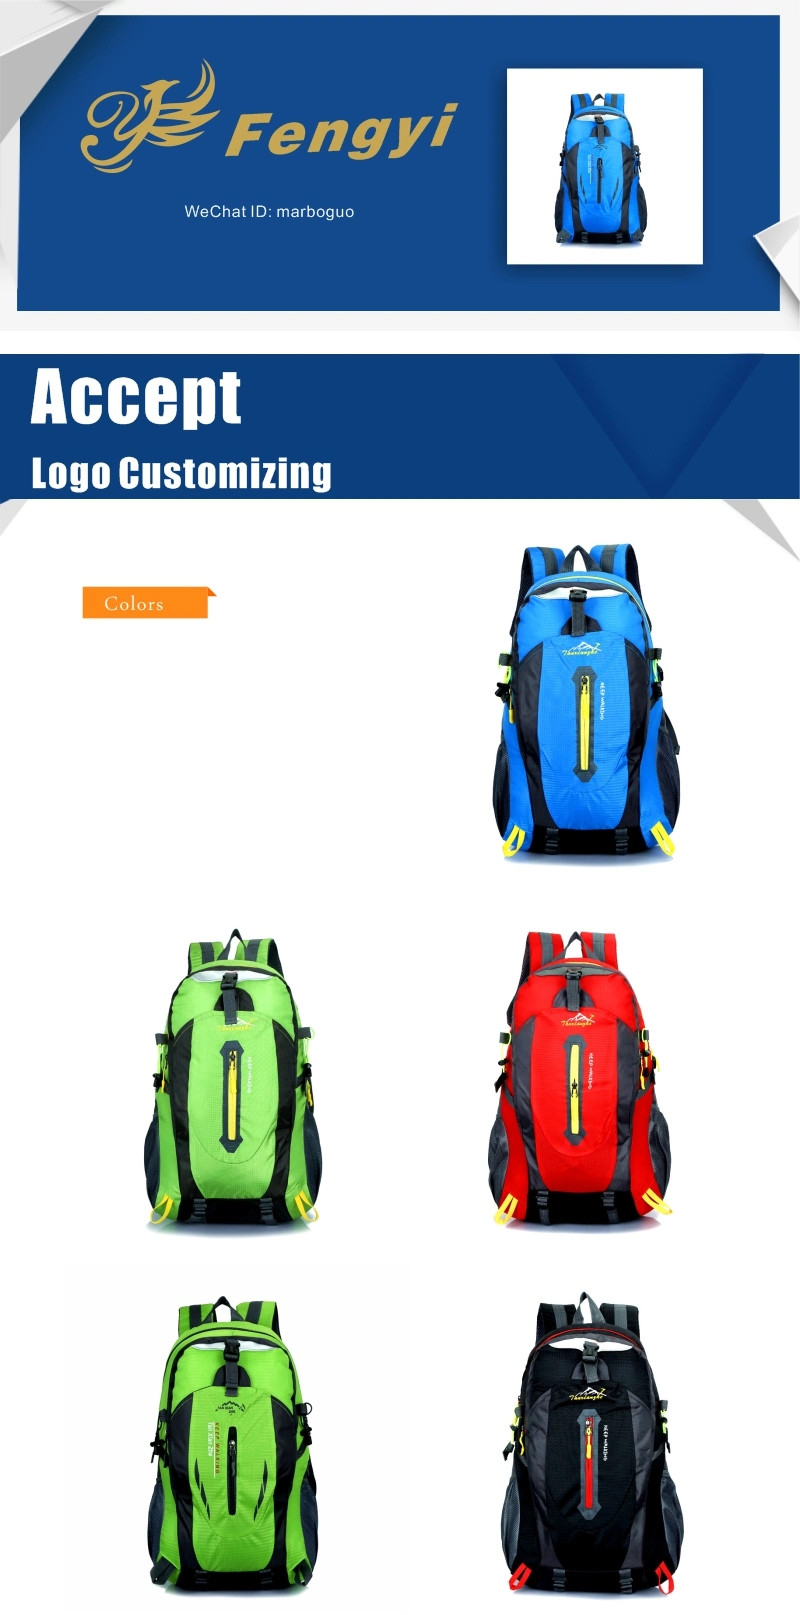 New Arrivals Hot Selling Popular Fashion Outdoor Travel Sport Hiking Running Camping Backpack Bag